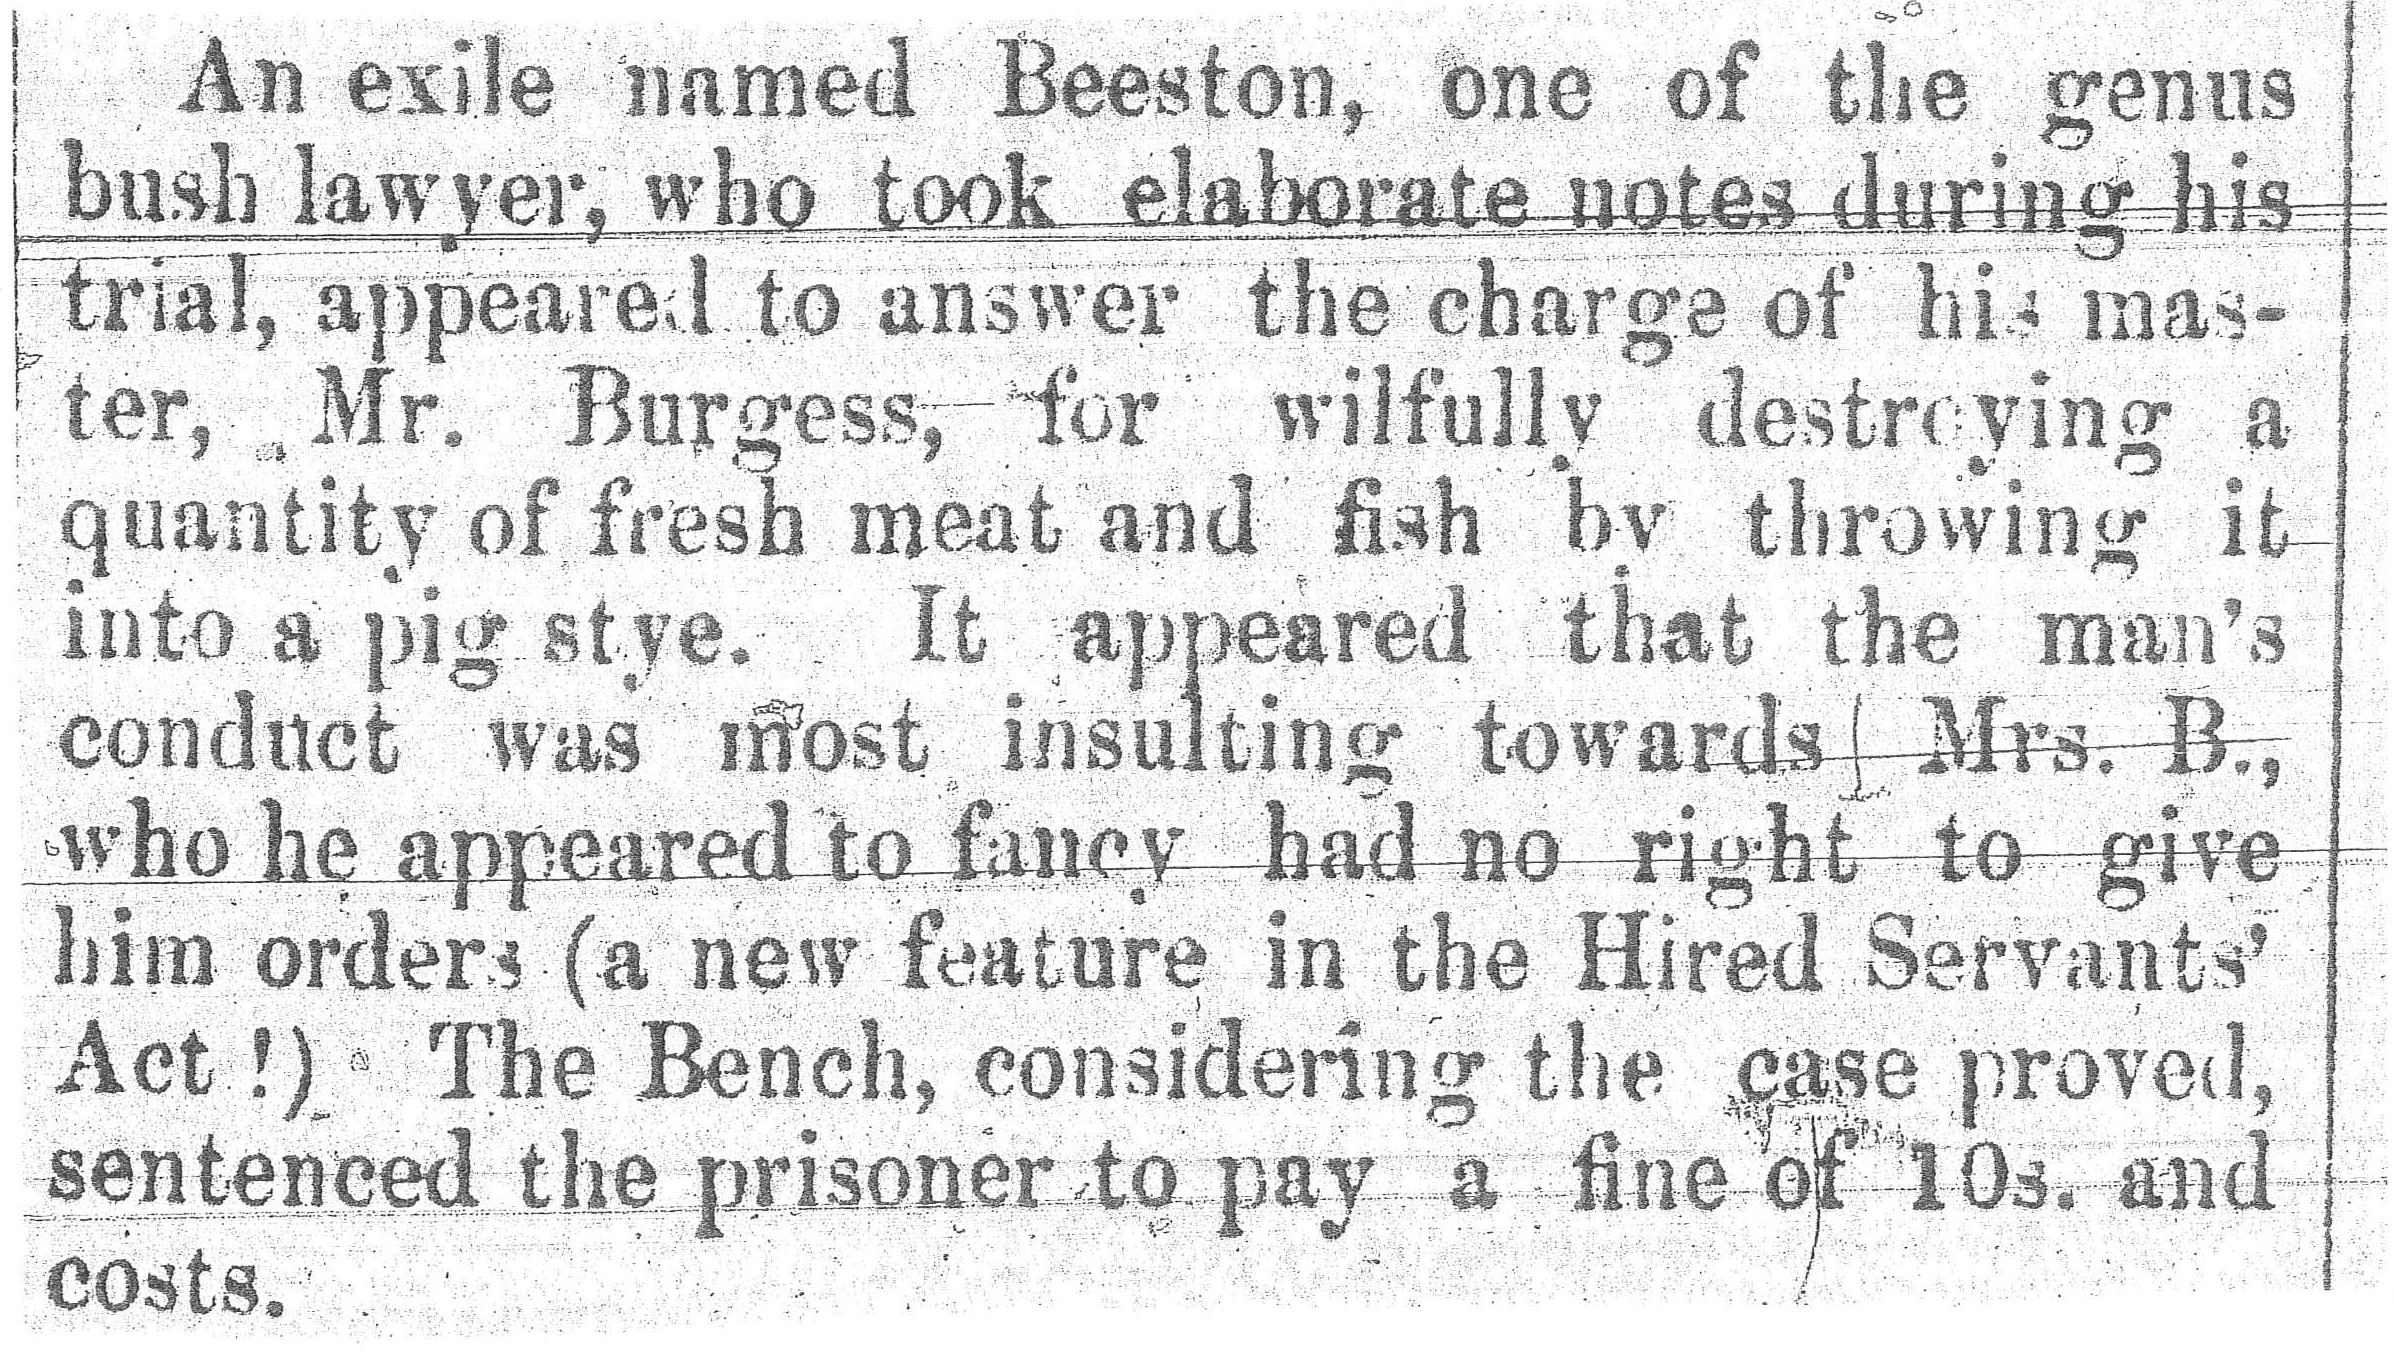 A description of Be(e)ston as an exile and his trial